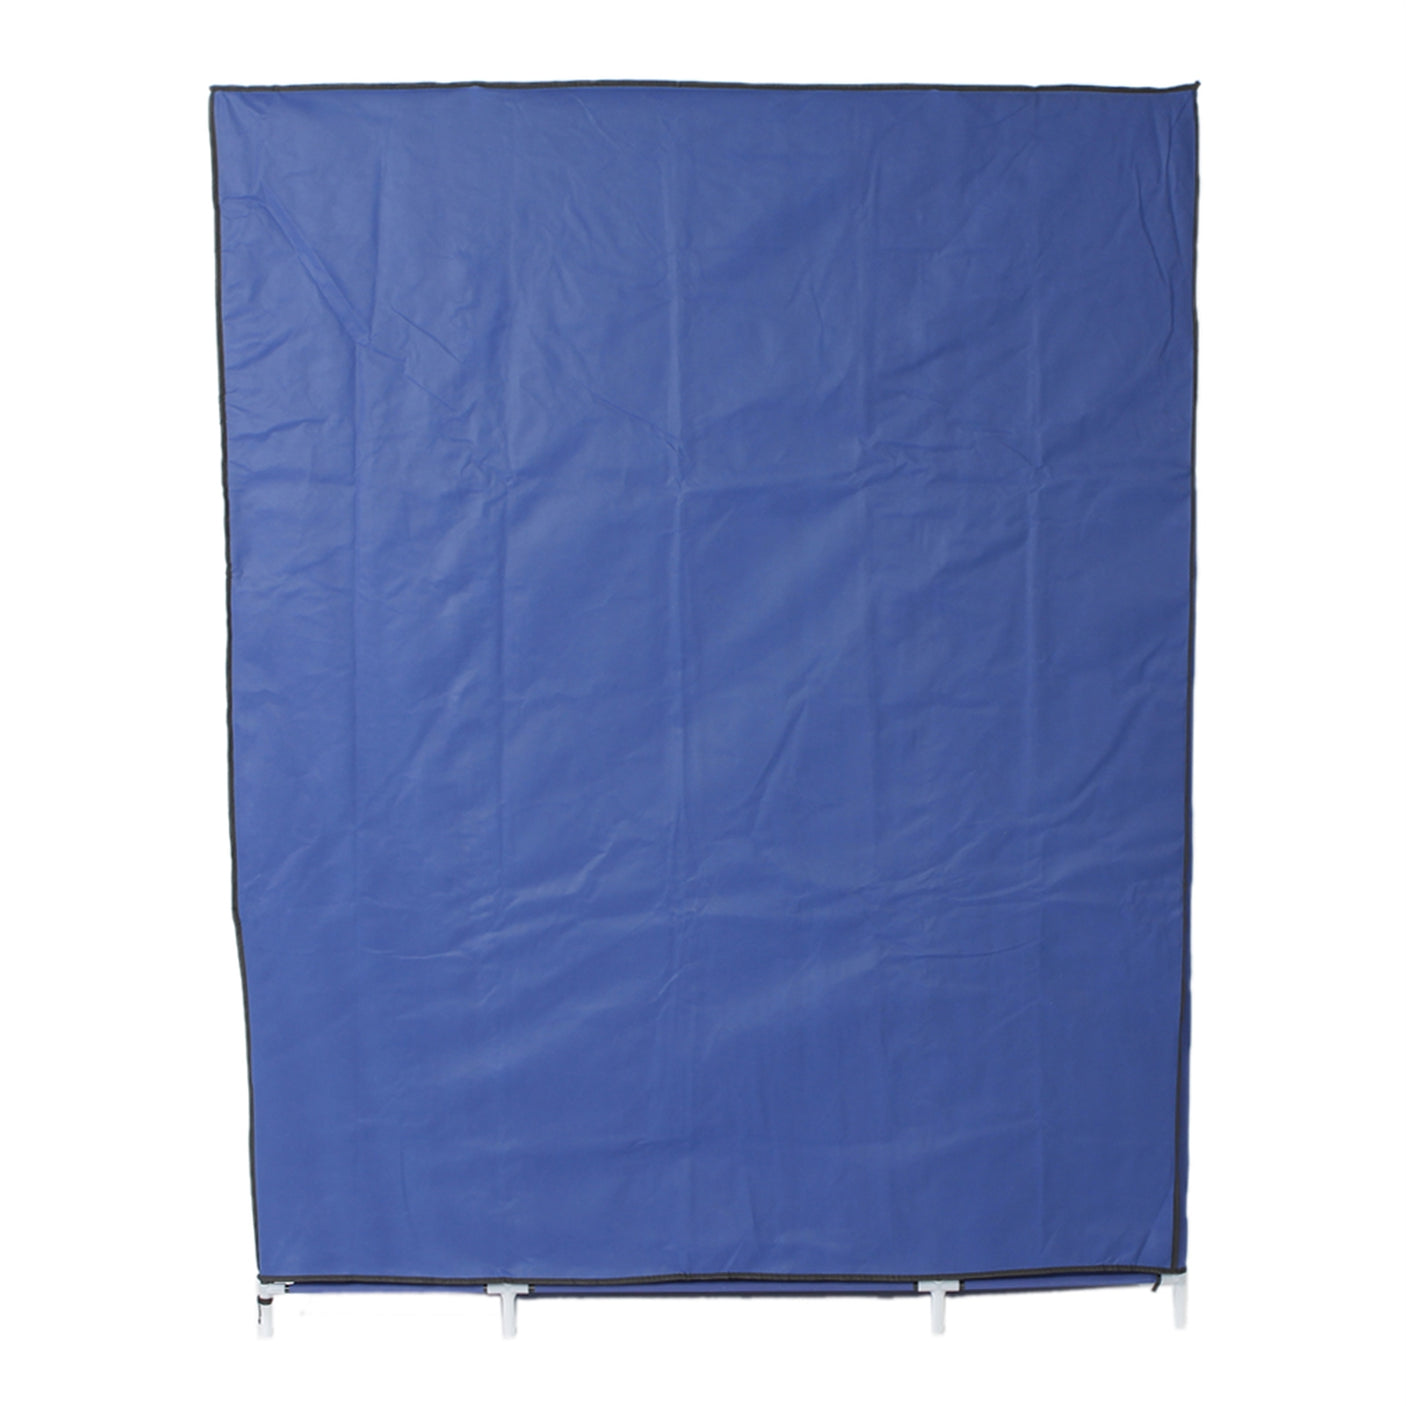 Pop Up Fabric Wardrobe 12 compartment - Navy Blue